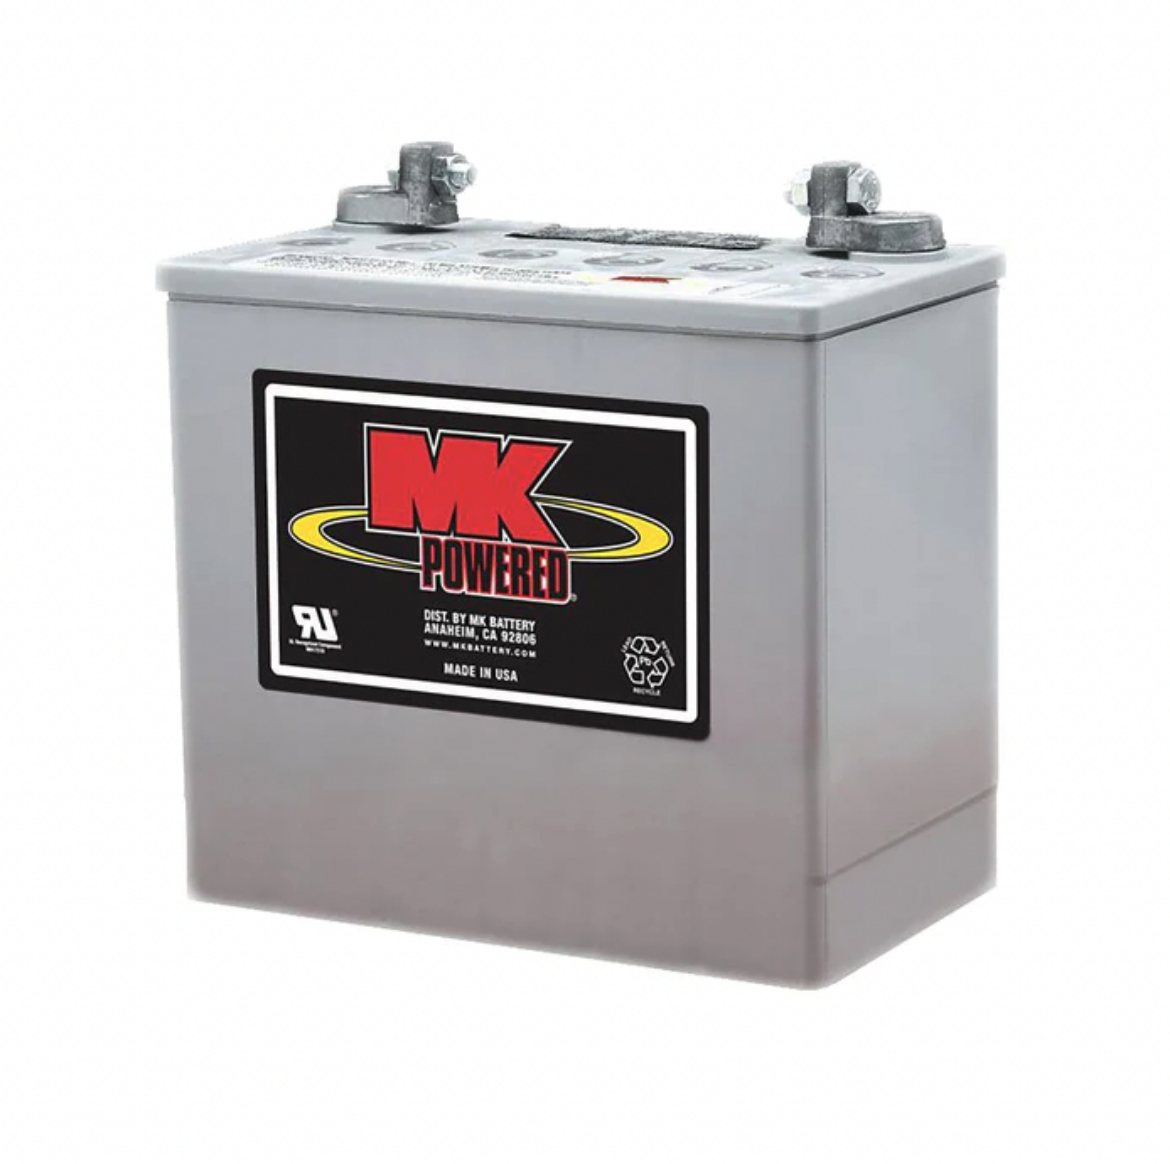 Picture of 12VOLT 51AH MK GEL DEEP CYCLE BATTERY